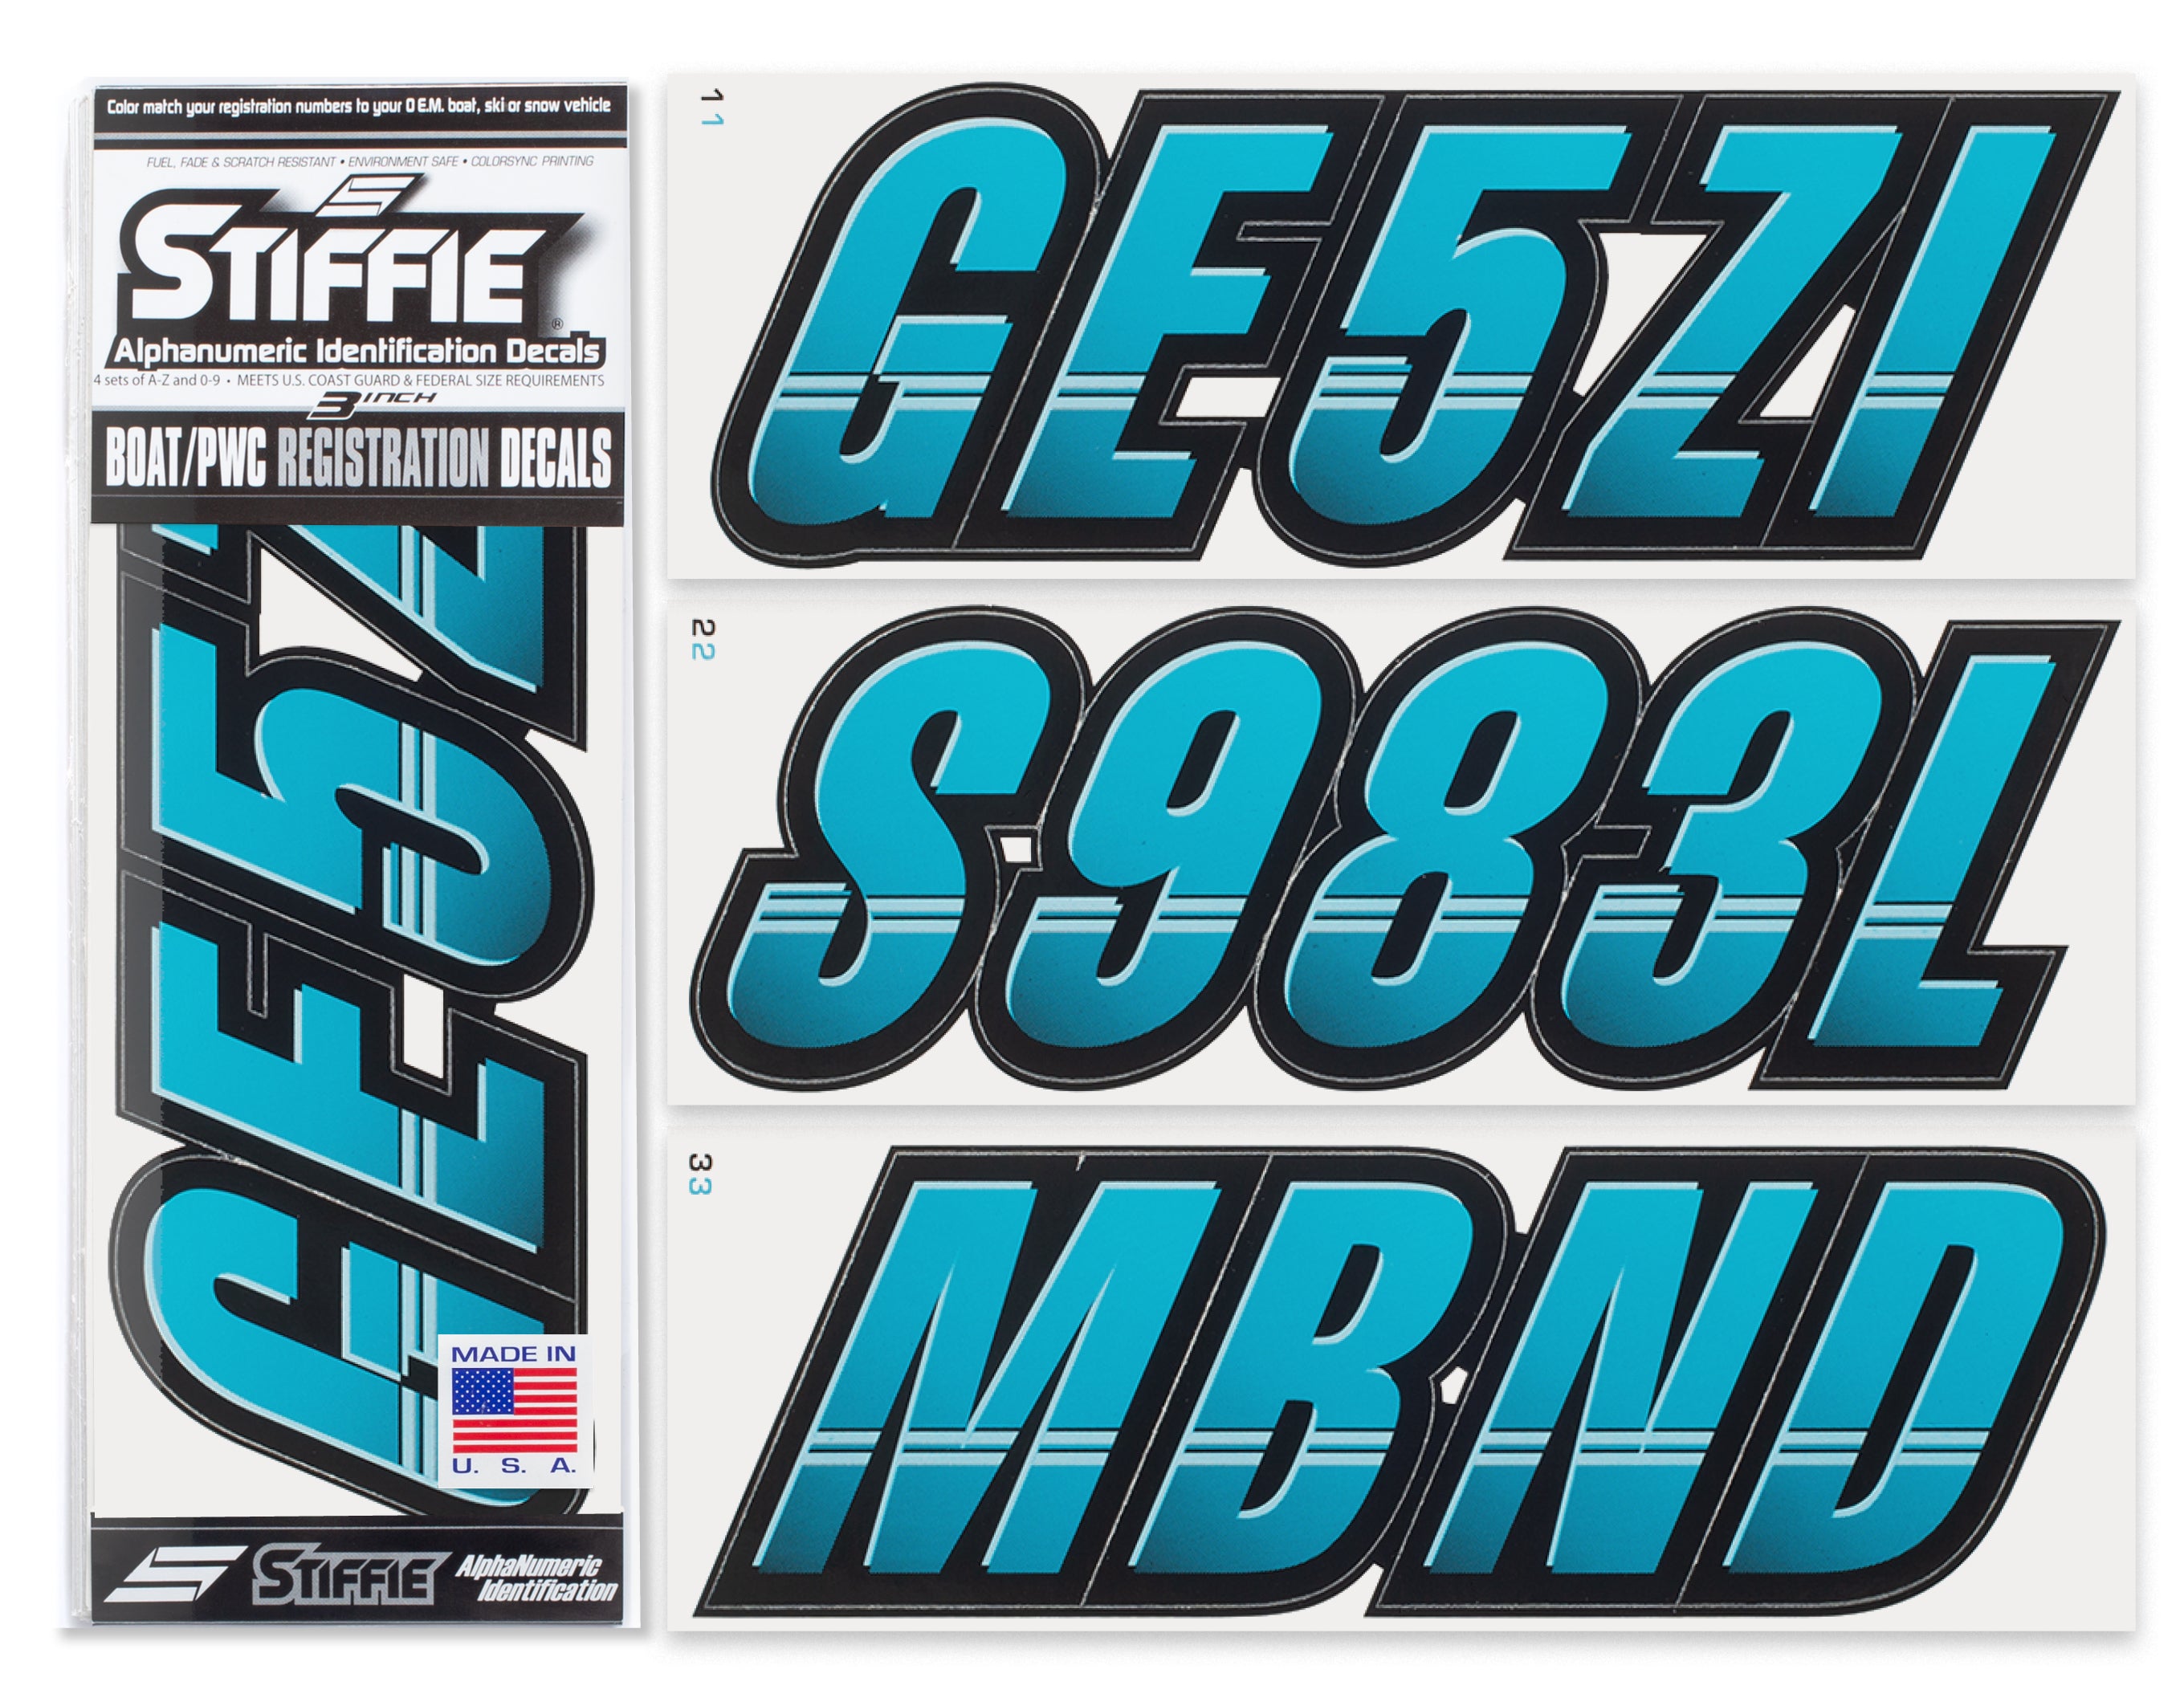 Stiffie Techtron Sky Blue/Black 3" Alpha-Numeric Registration Identification Numbers Stickers Decals for Boats & Personal Watercraft